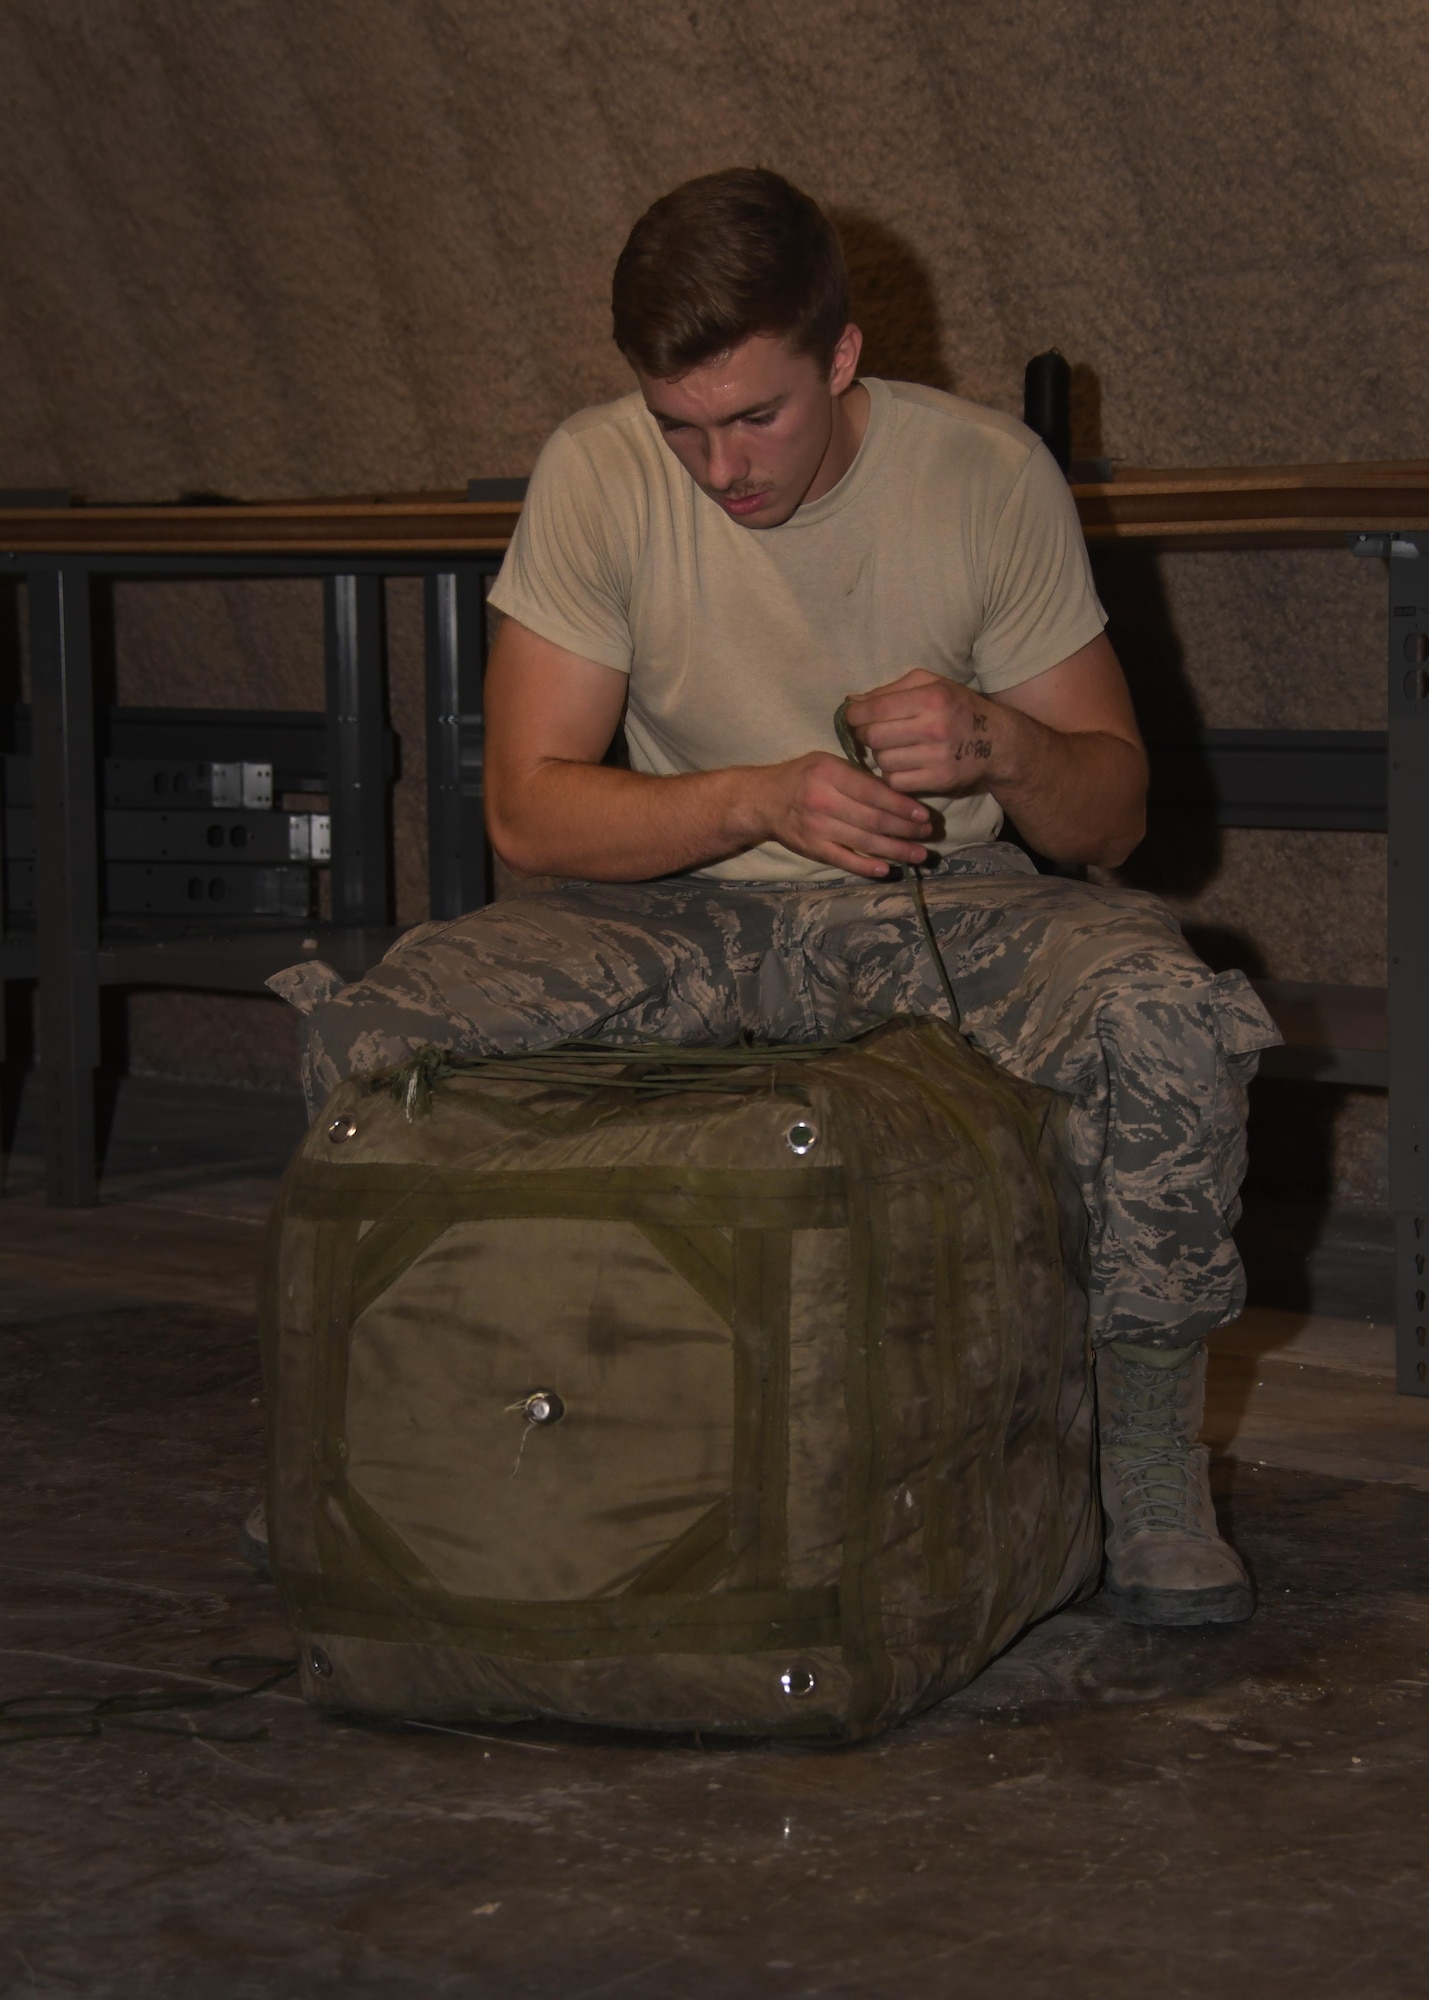 U.S. Air Force Airman 1st Class Eric Hornbeck, 379th Expeditionary Operations Support Squadron aircrew flight equipment technician, laces up a drag parachute deployment bag after a chute has been packed into it at Al Udeid Air Base, Qatar, Nov. 30, 2016. These drag chutes are used to help slow down aircraft after landing and help take strain off of the breaks. (U.S. Air Force photo by Senior Airman Miles Wilson)